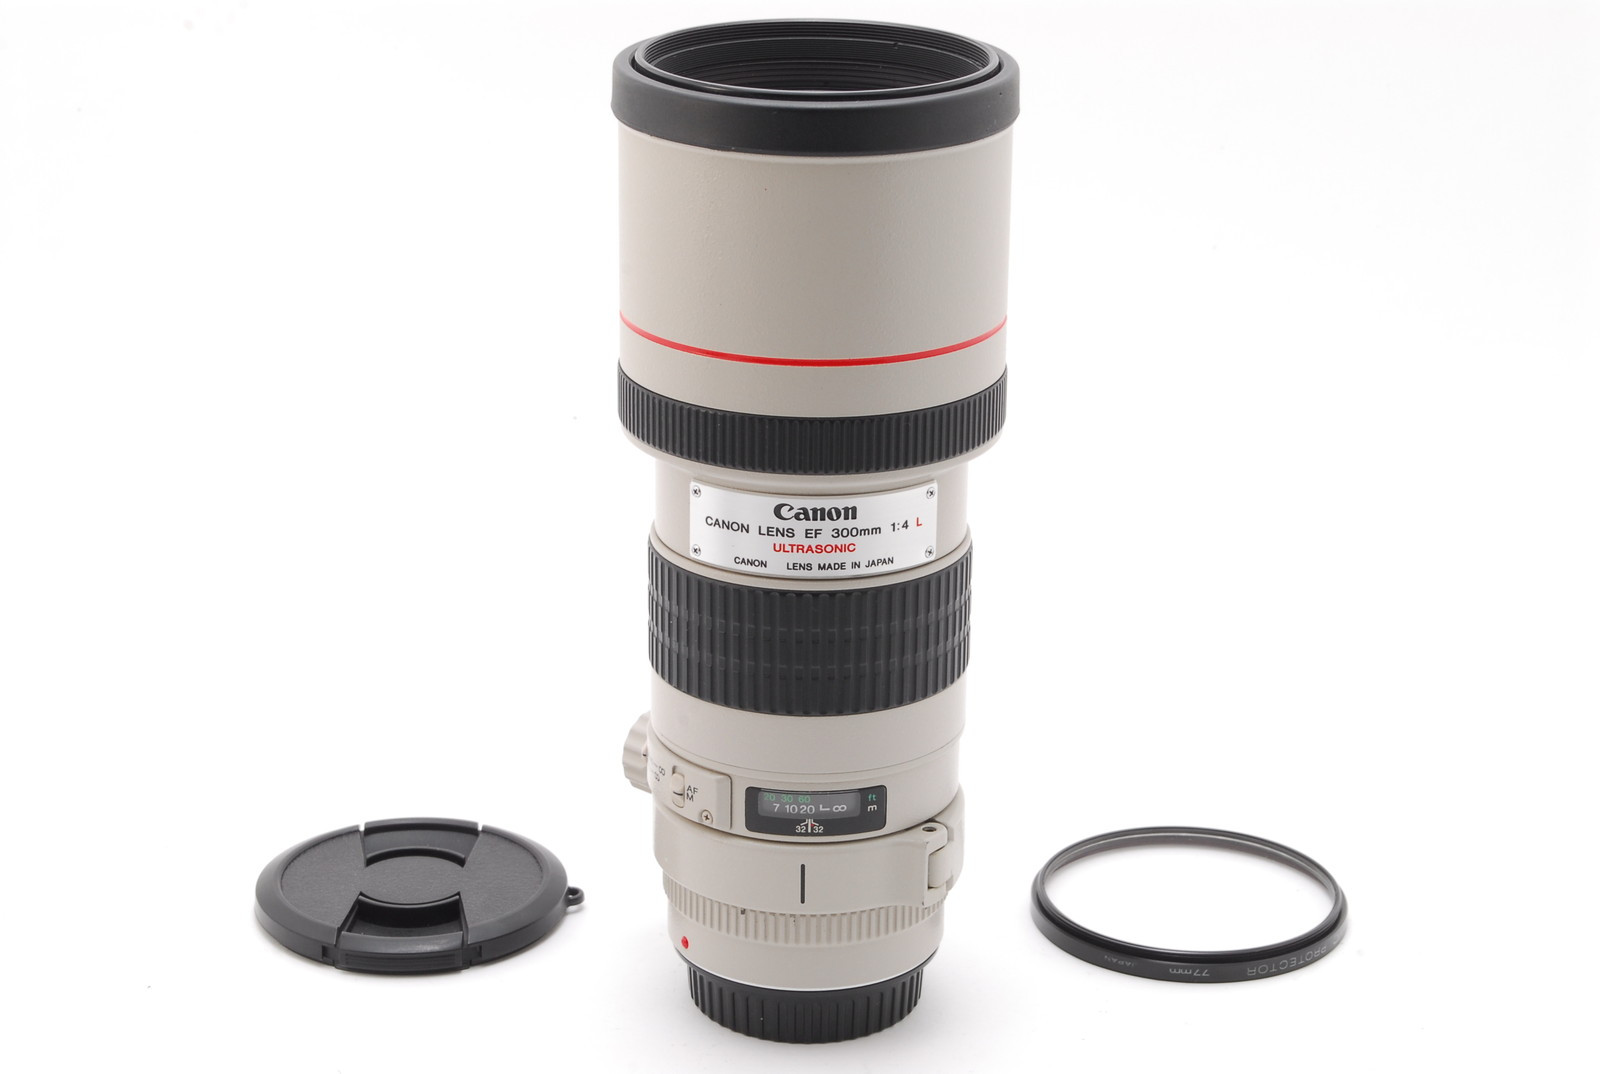 PROMOTION.MINT Canon EF 300mm f/4 L ULTRASONIC, Front & Rear Caps, Lens Filter from Japan